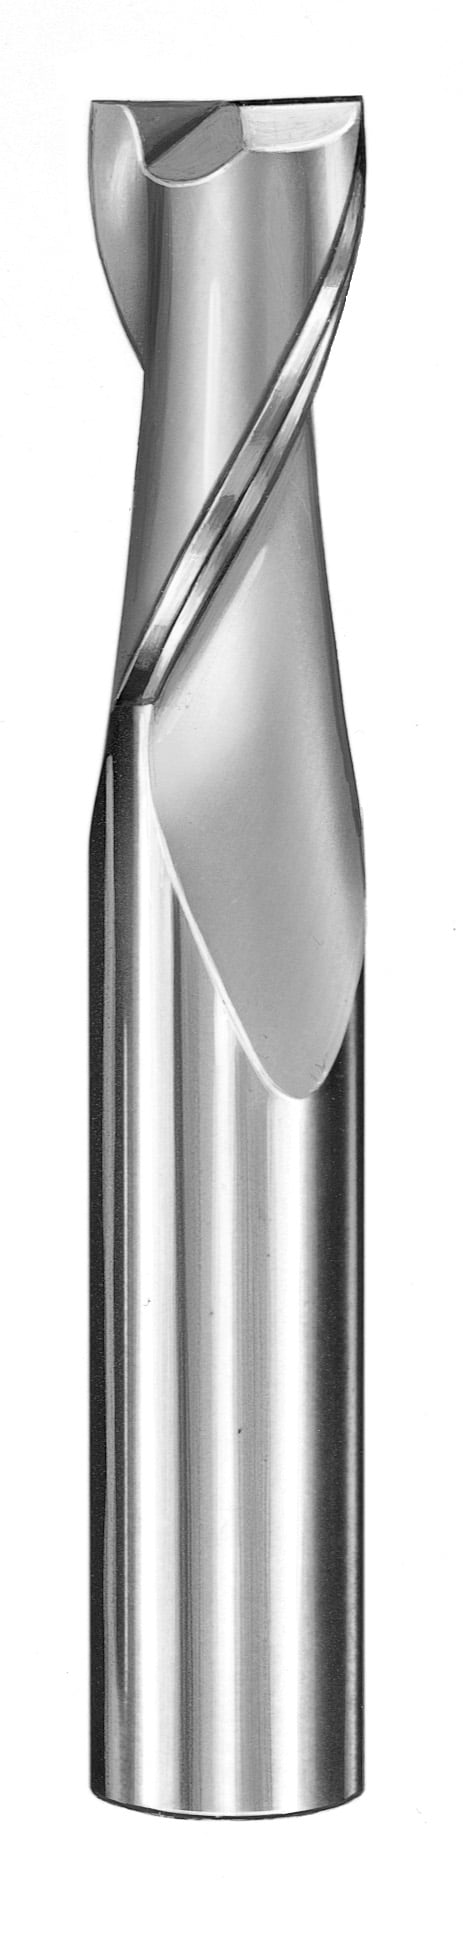 1/2" Dia, 2 Flute, Square End End Mill - 30363